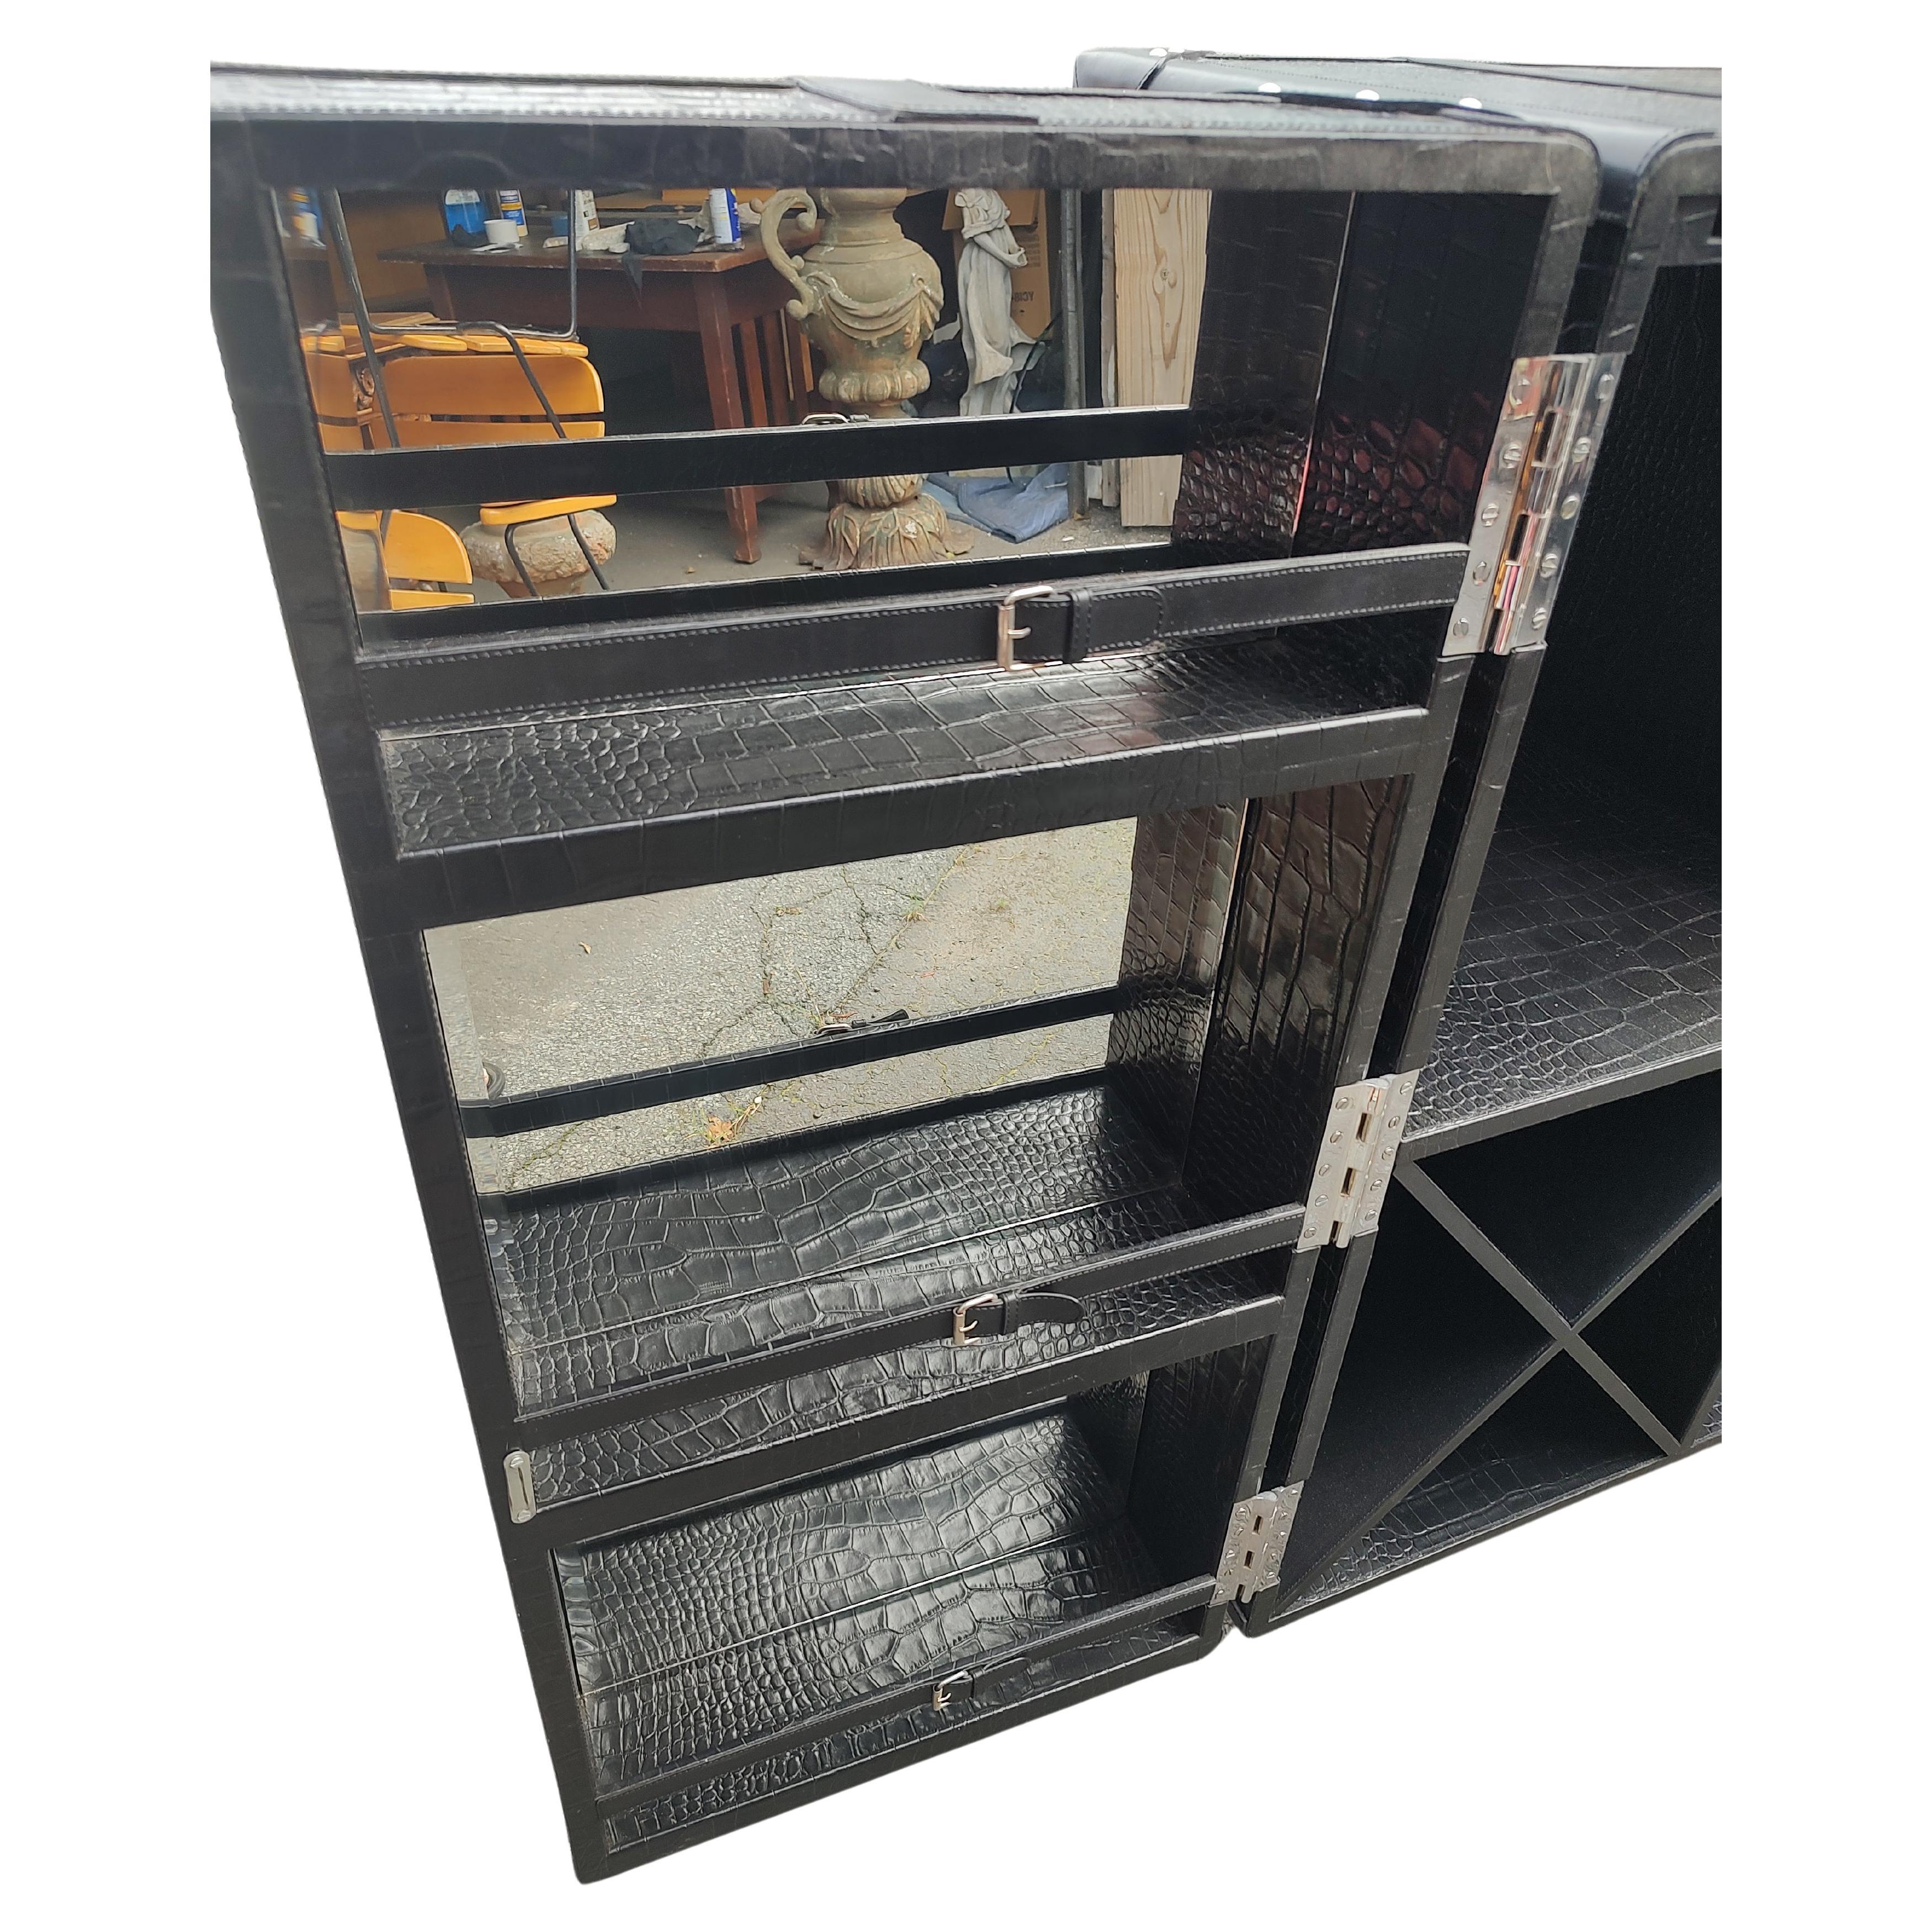 Fabulous bar Cabinet on wheels. Embossed crocodile leather cabinet with a totally fitted and mirrored areas for storage and celebration. Cabinet opens up French door style with shelving and compartments on the inside of the doors as well. All fitted